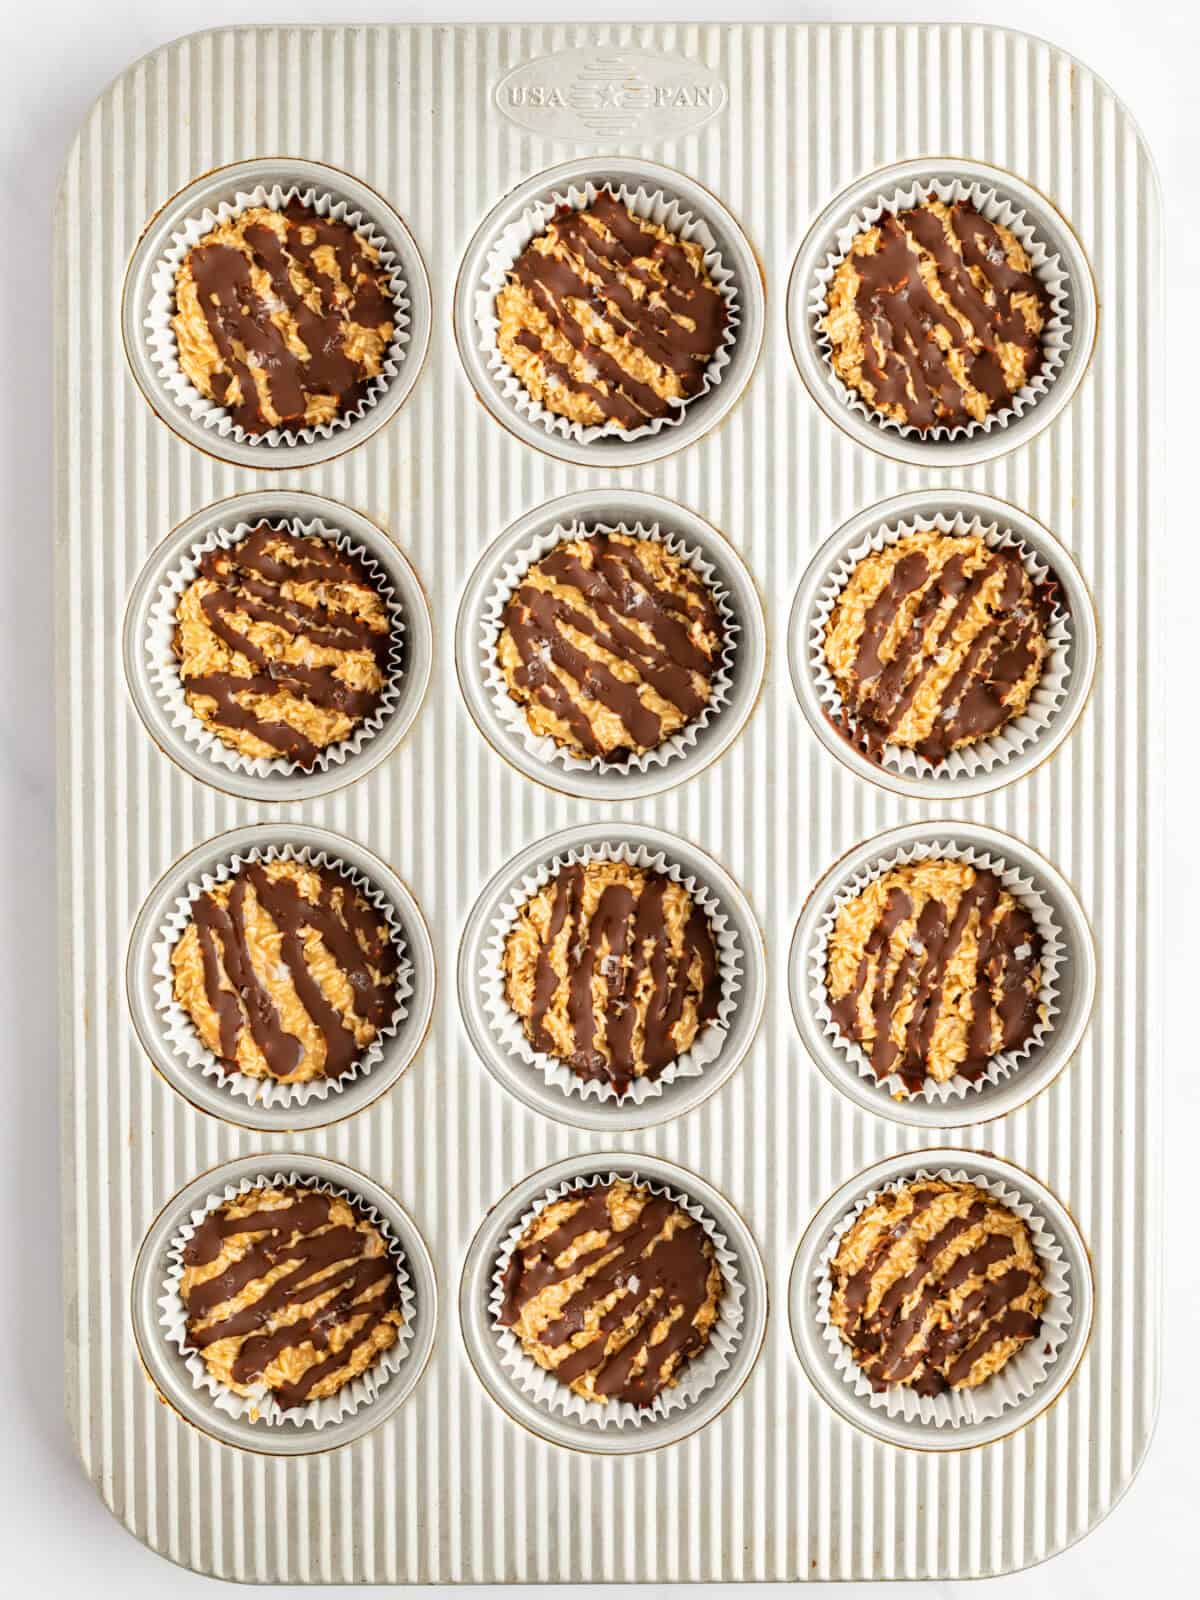 A muffin tin filled with 12 chocolate-drizzled oatmeal cookies in white paper liners.